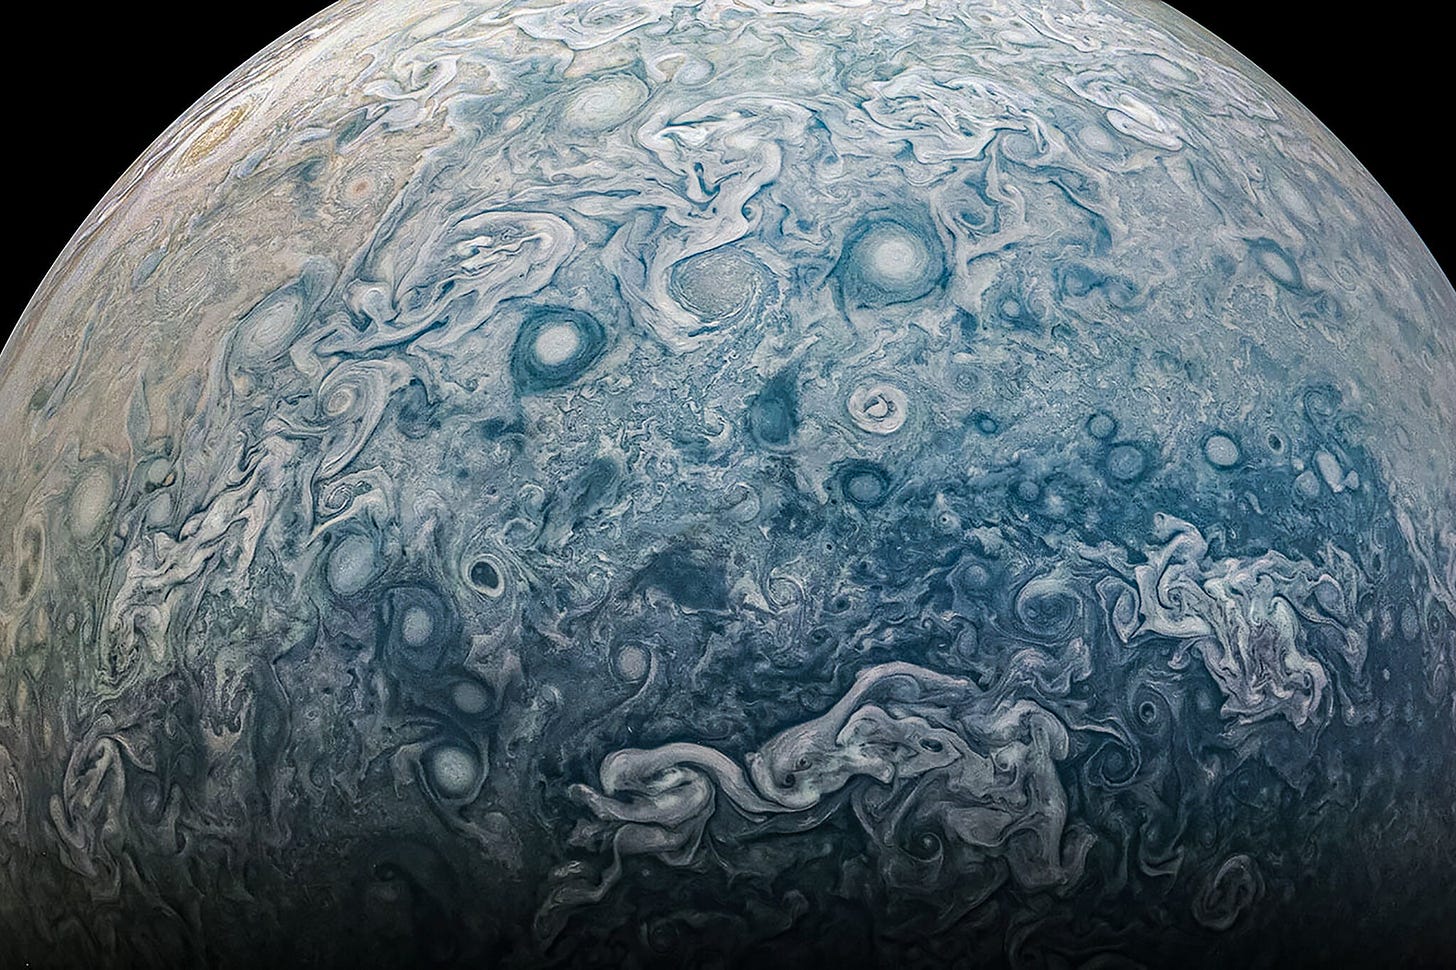 https://static01.nyt.com/images/2021/06/15/science/14SCI-JUNO-northern/14SCI-JUNO-northern-superJumbo.jpg?quality=90&auto=webp